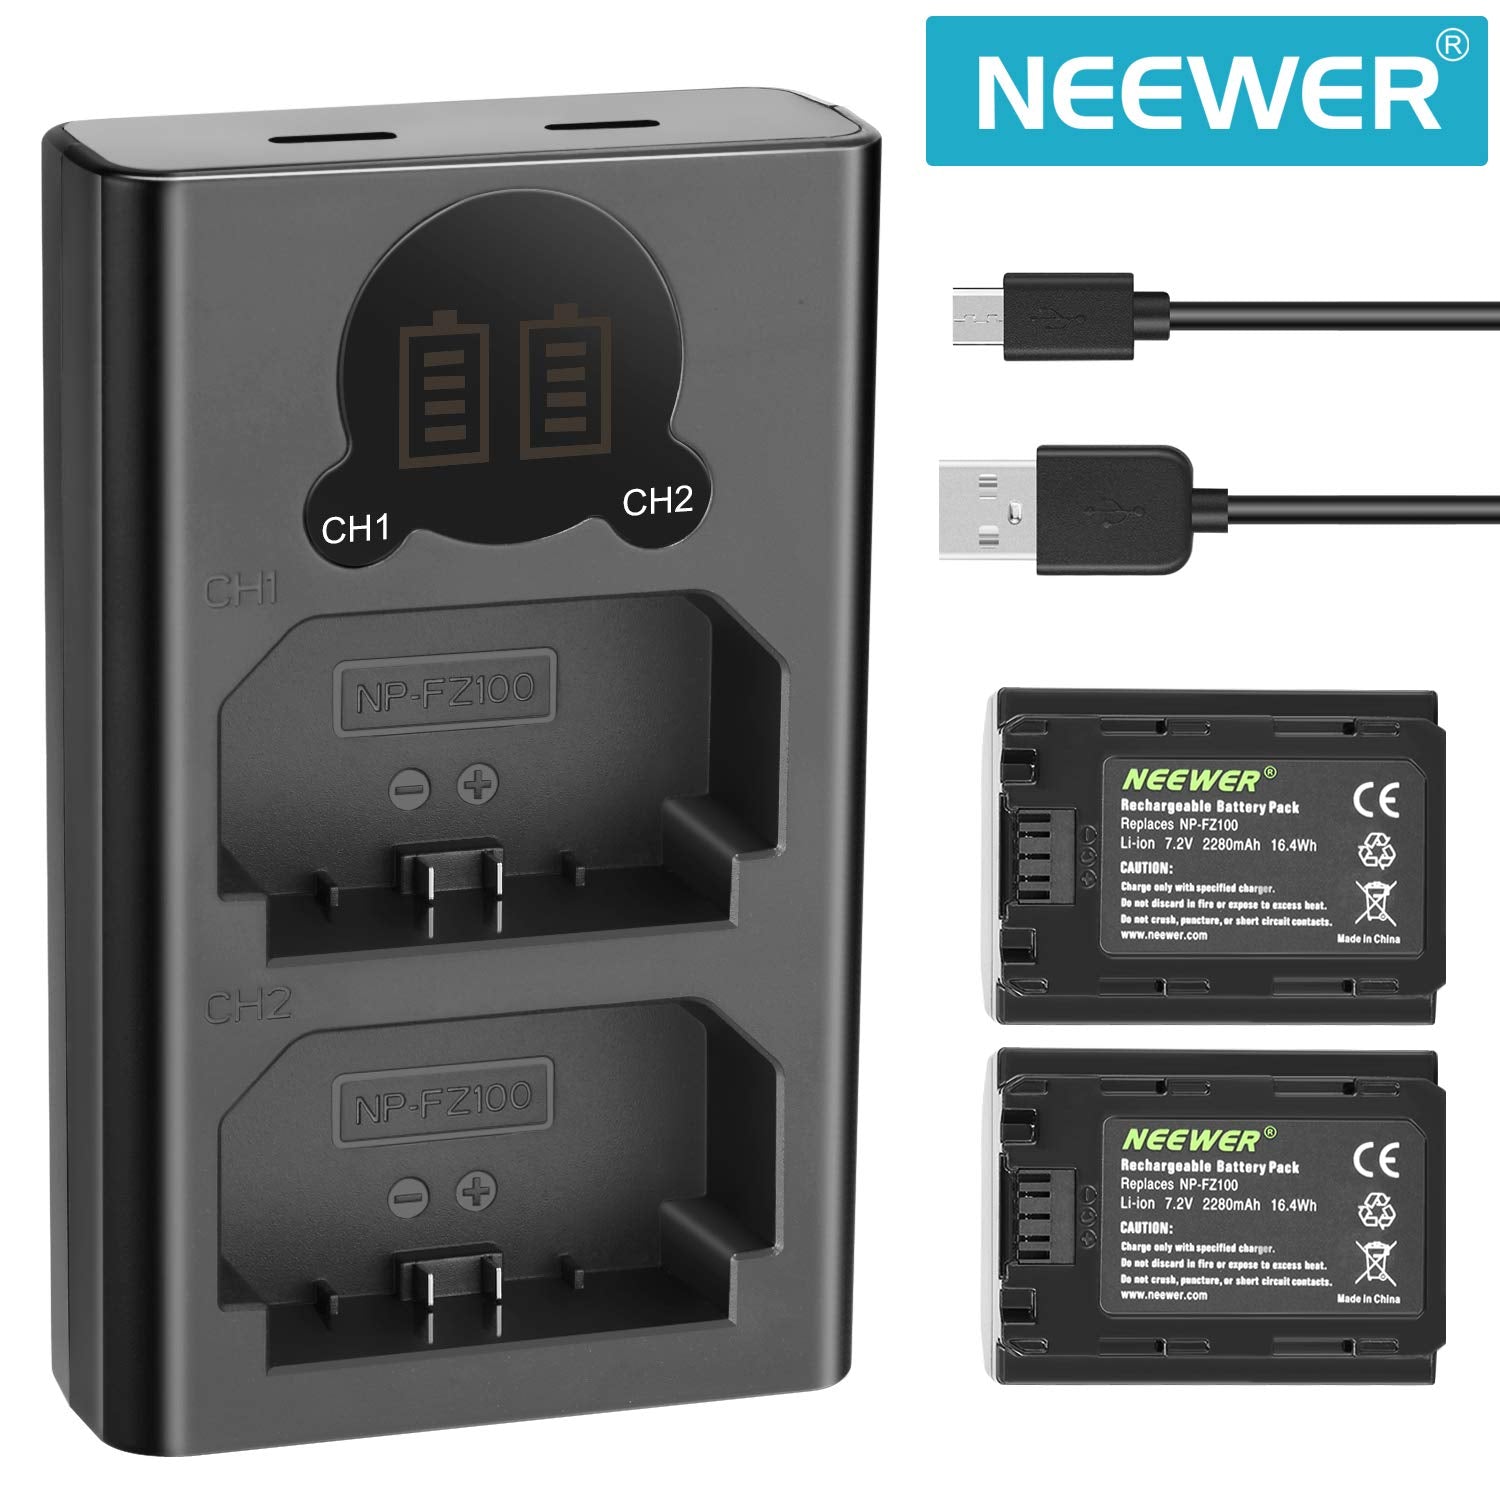 Neewer NP-FZ100 Replacement Battery Charger Set - Dual USB Battery Charger with LCD Display Compatible with Sony A9 A7III A7RIII A7RIV Cameras (2-Pack 7.2V 2280mAh Battery Versatile Charging Option)